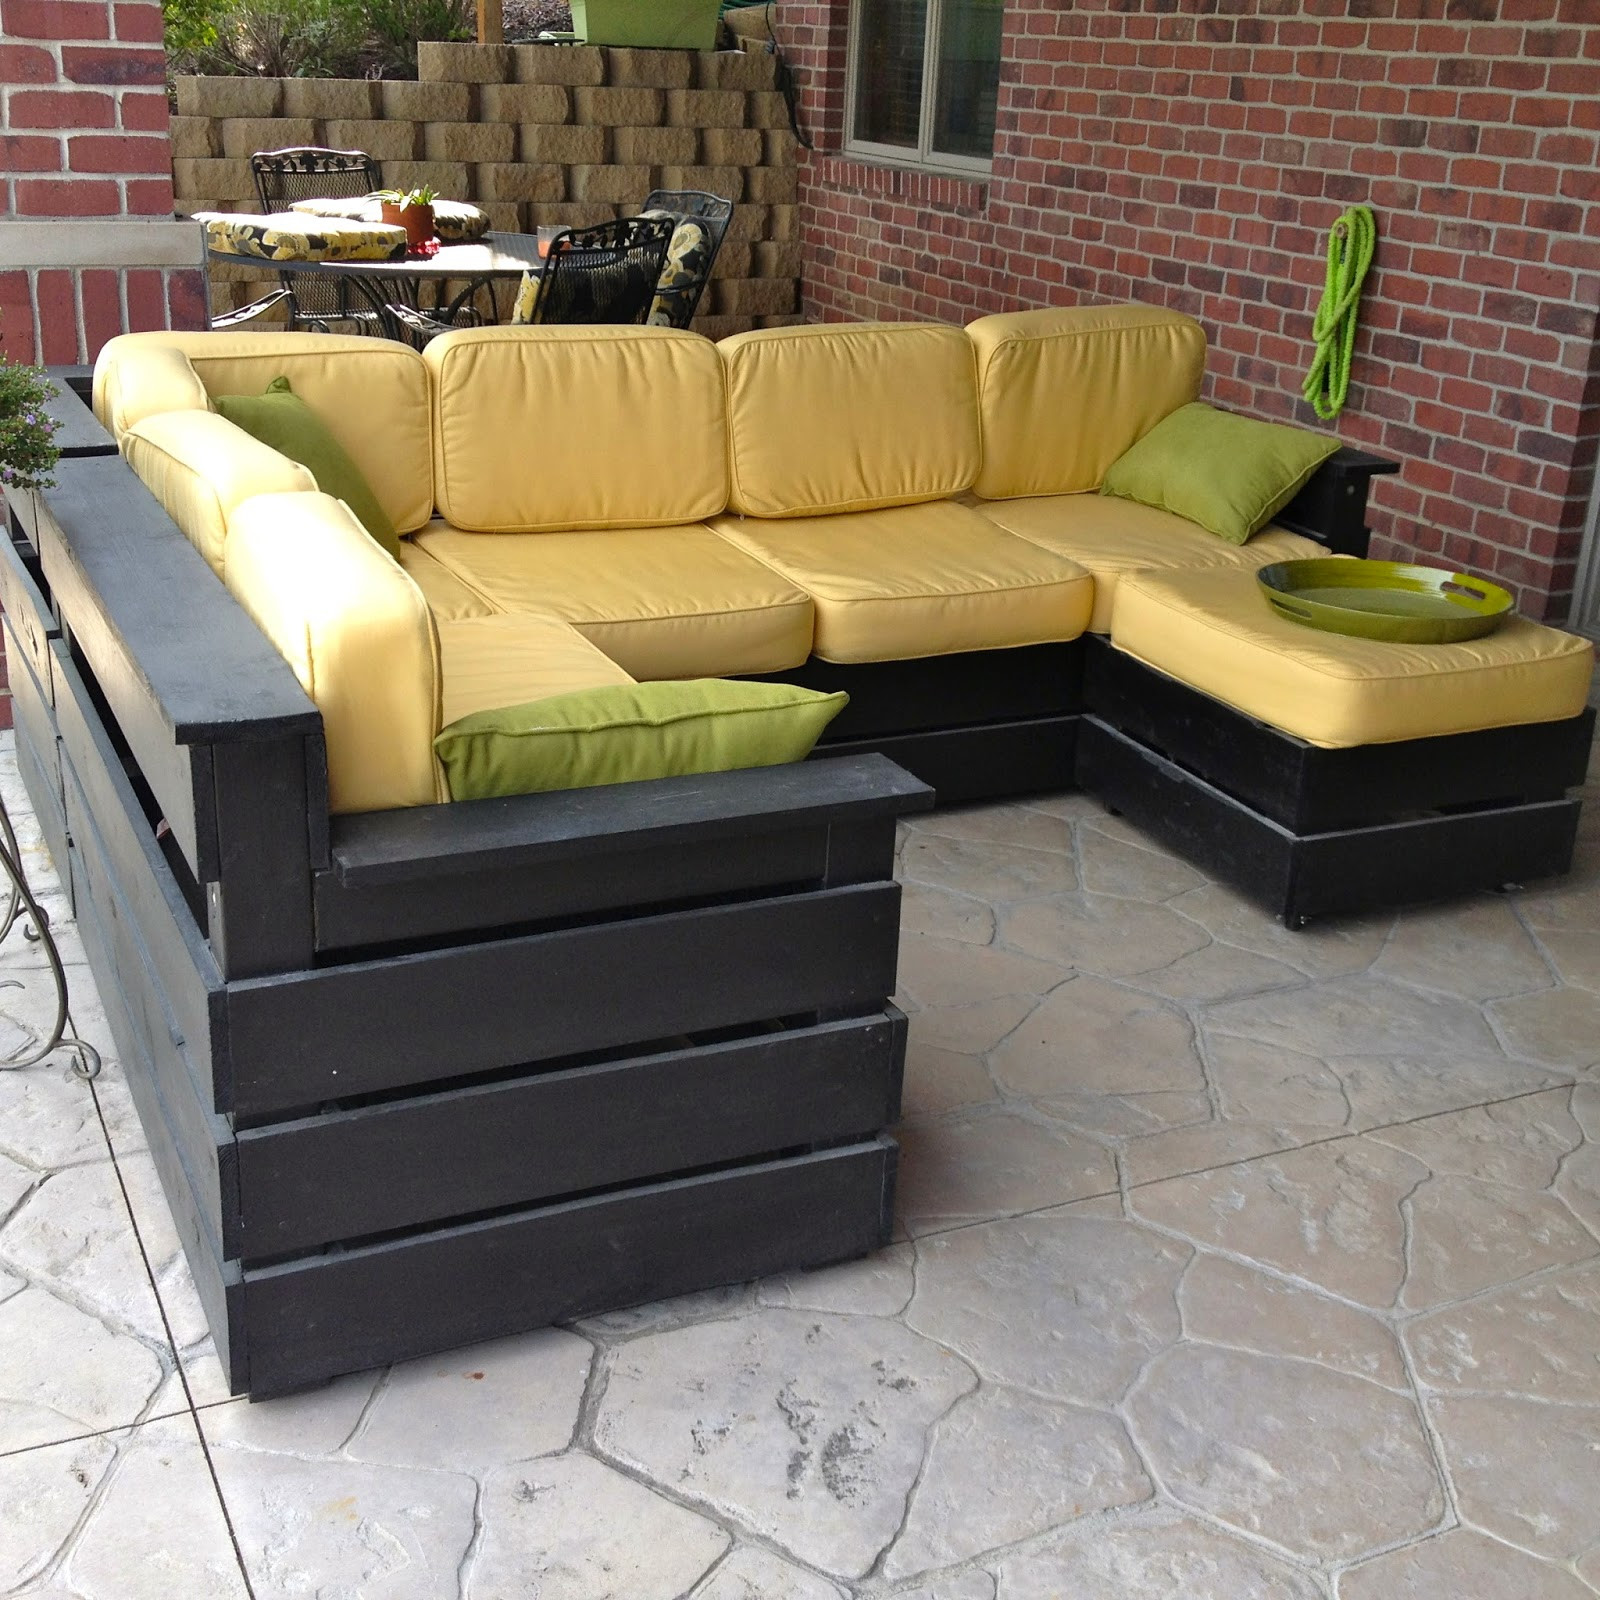 Outdoor Furniture DIY
 DIY Why Spend More DIY Outdoor Sectional